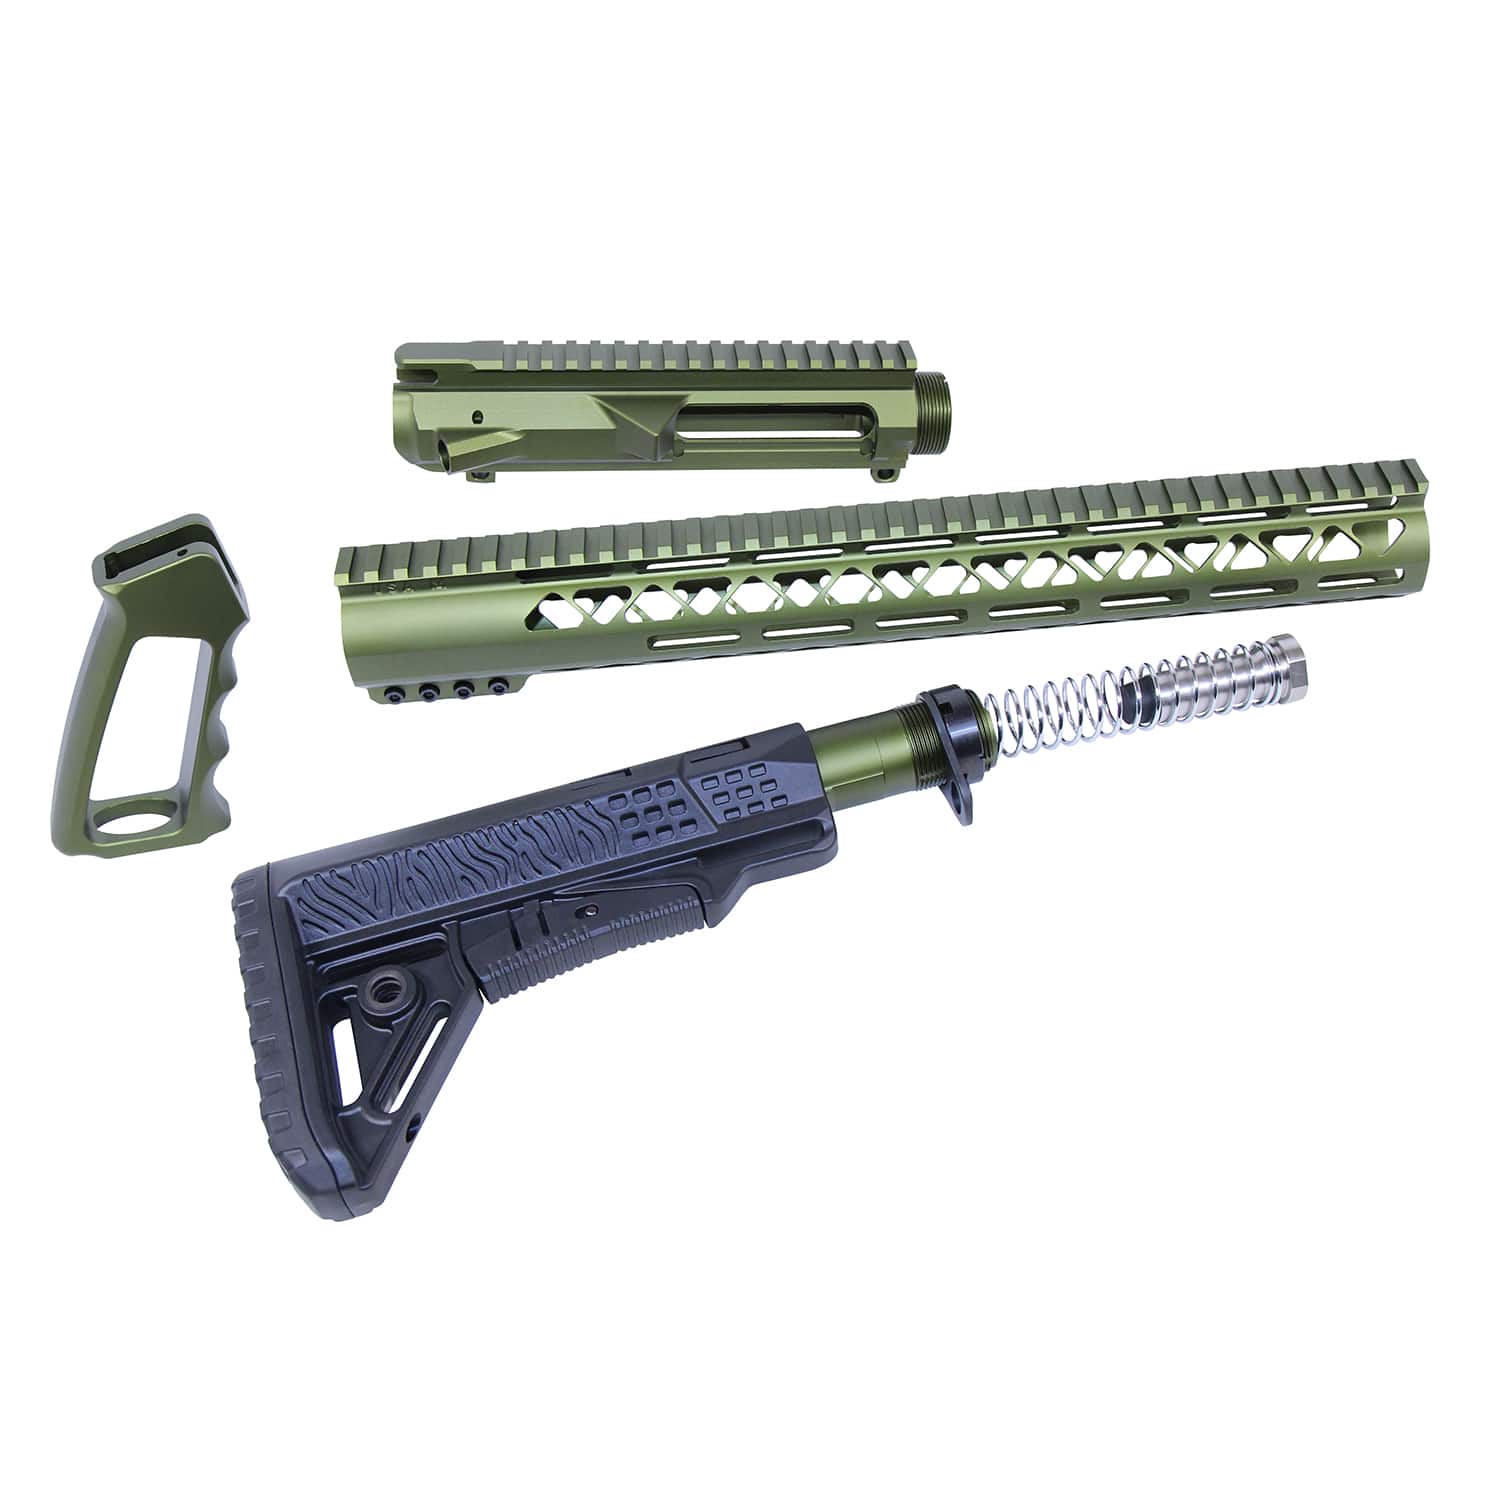 AR .308 furniture set with matching upper receiver in a green anodized finish.